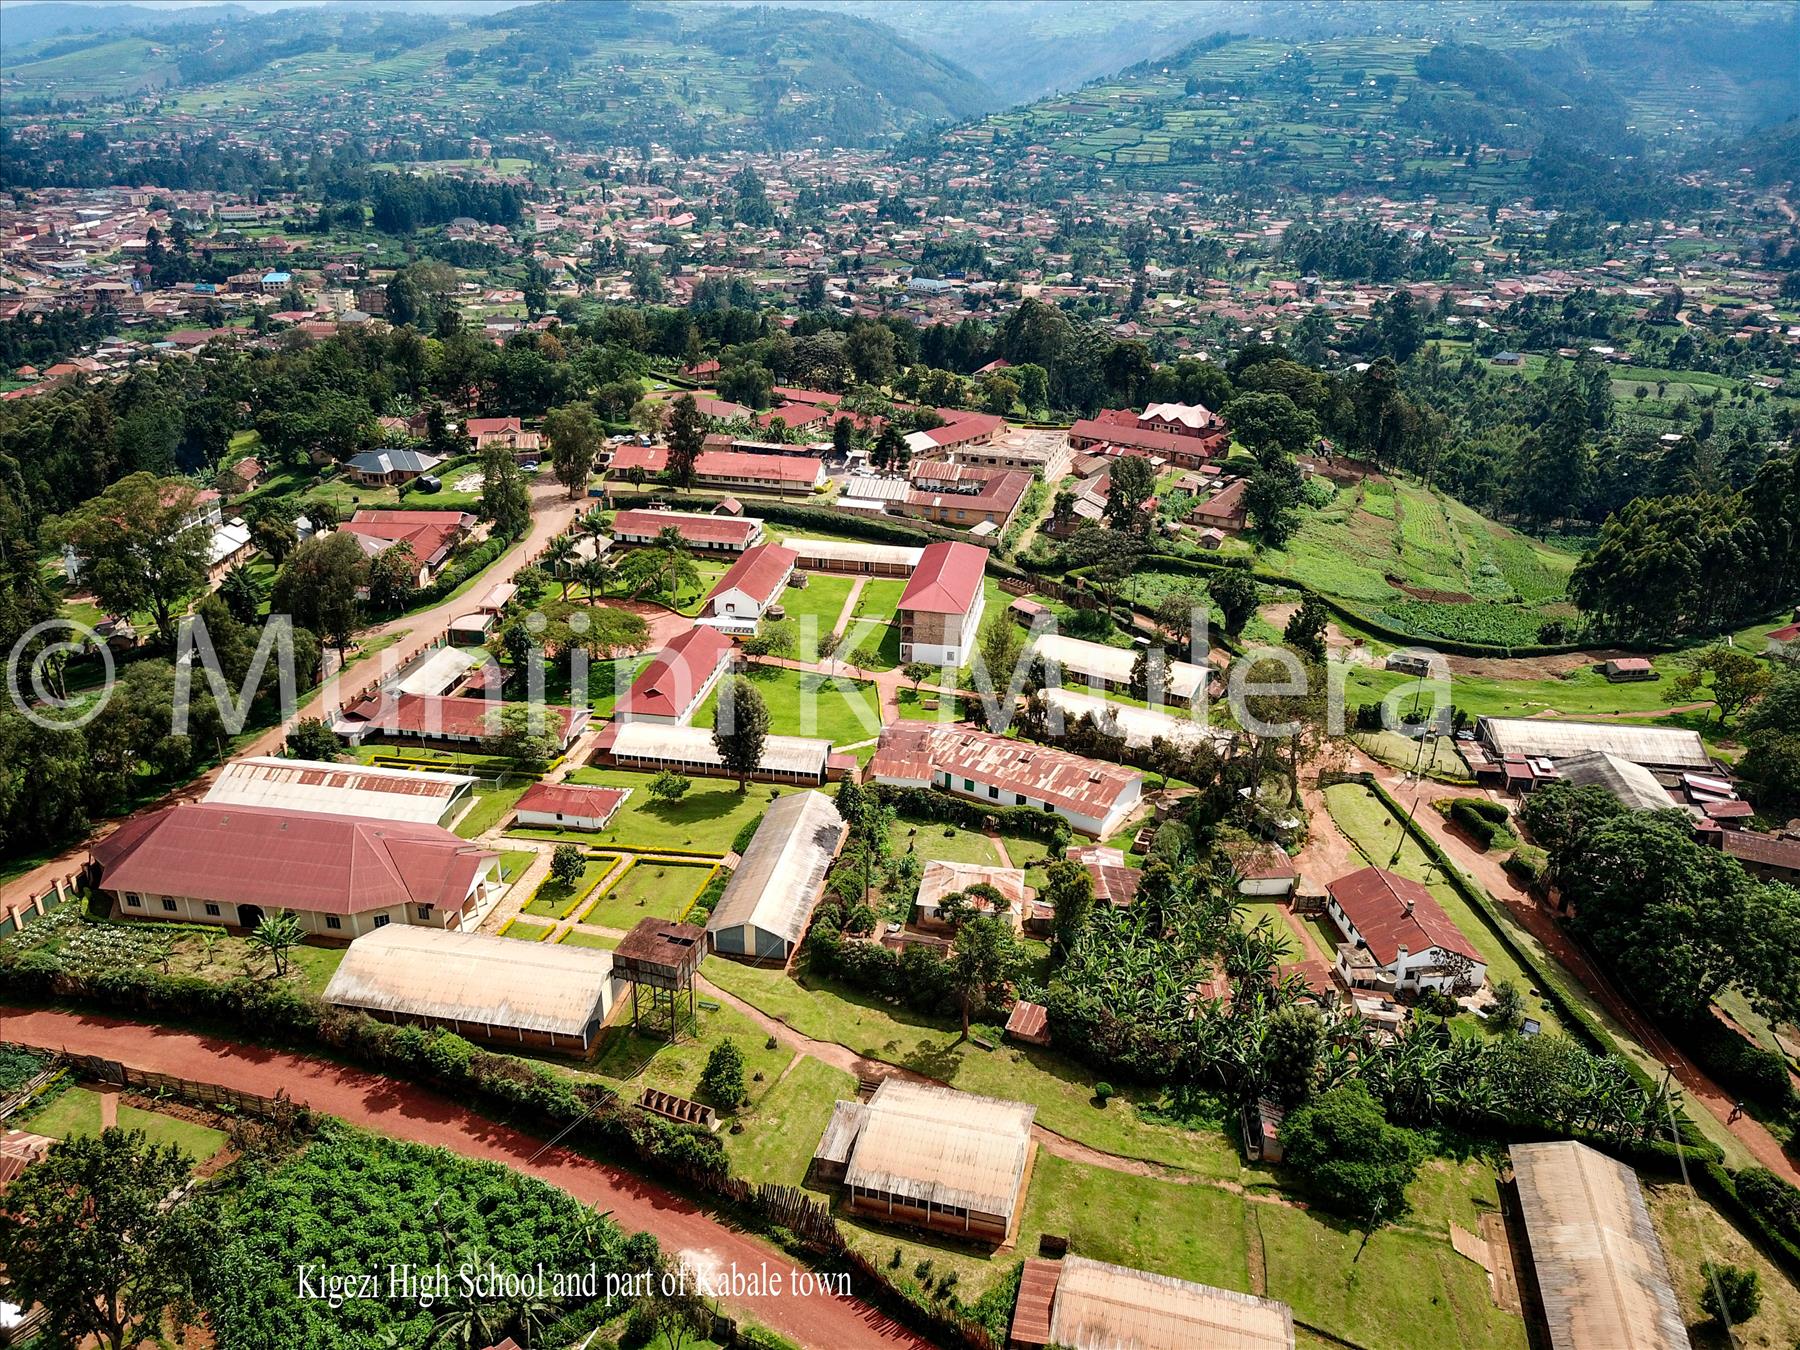 ​Kigezi High School@100: celebrate forgotten founders and builders